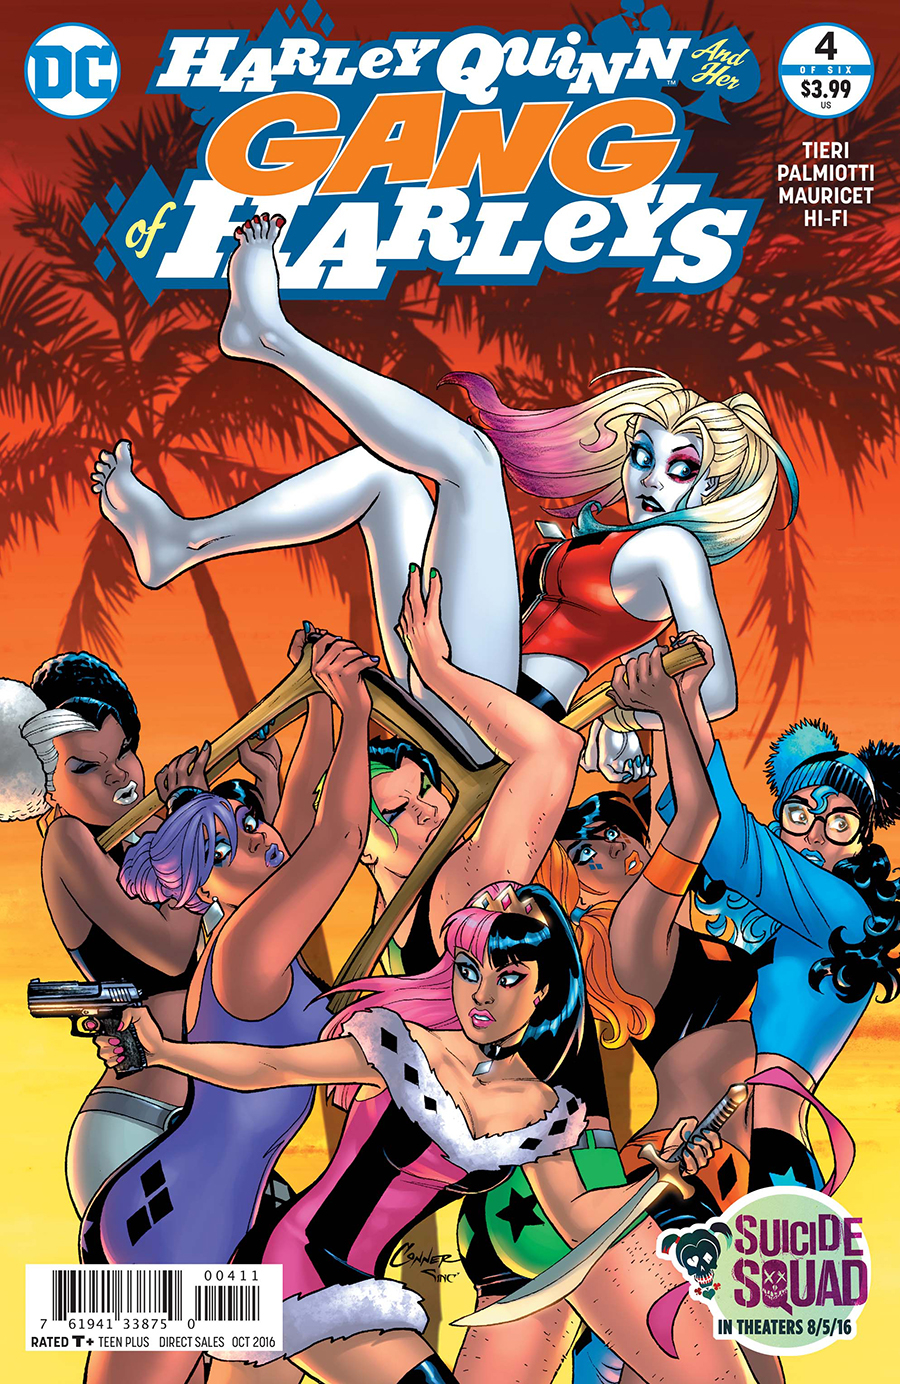 HARLEY QUINN AND HER GANG OF HARLEYS #4 (OF 6)